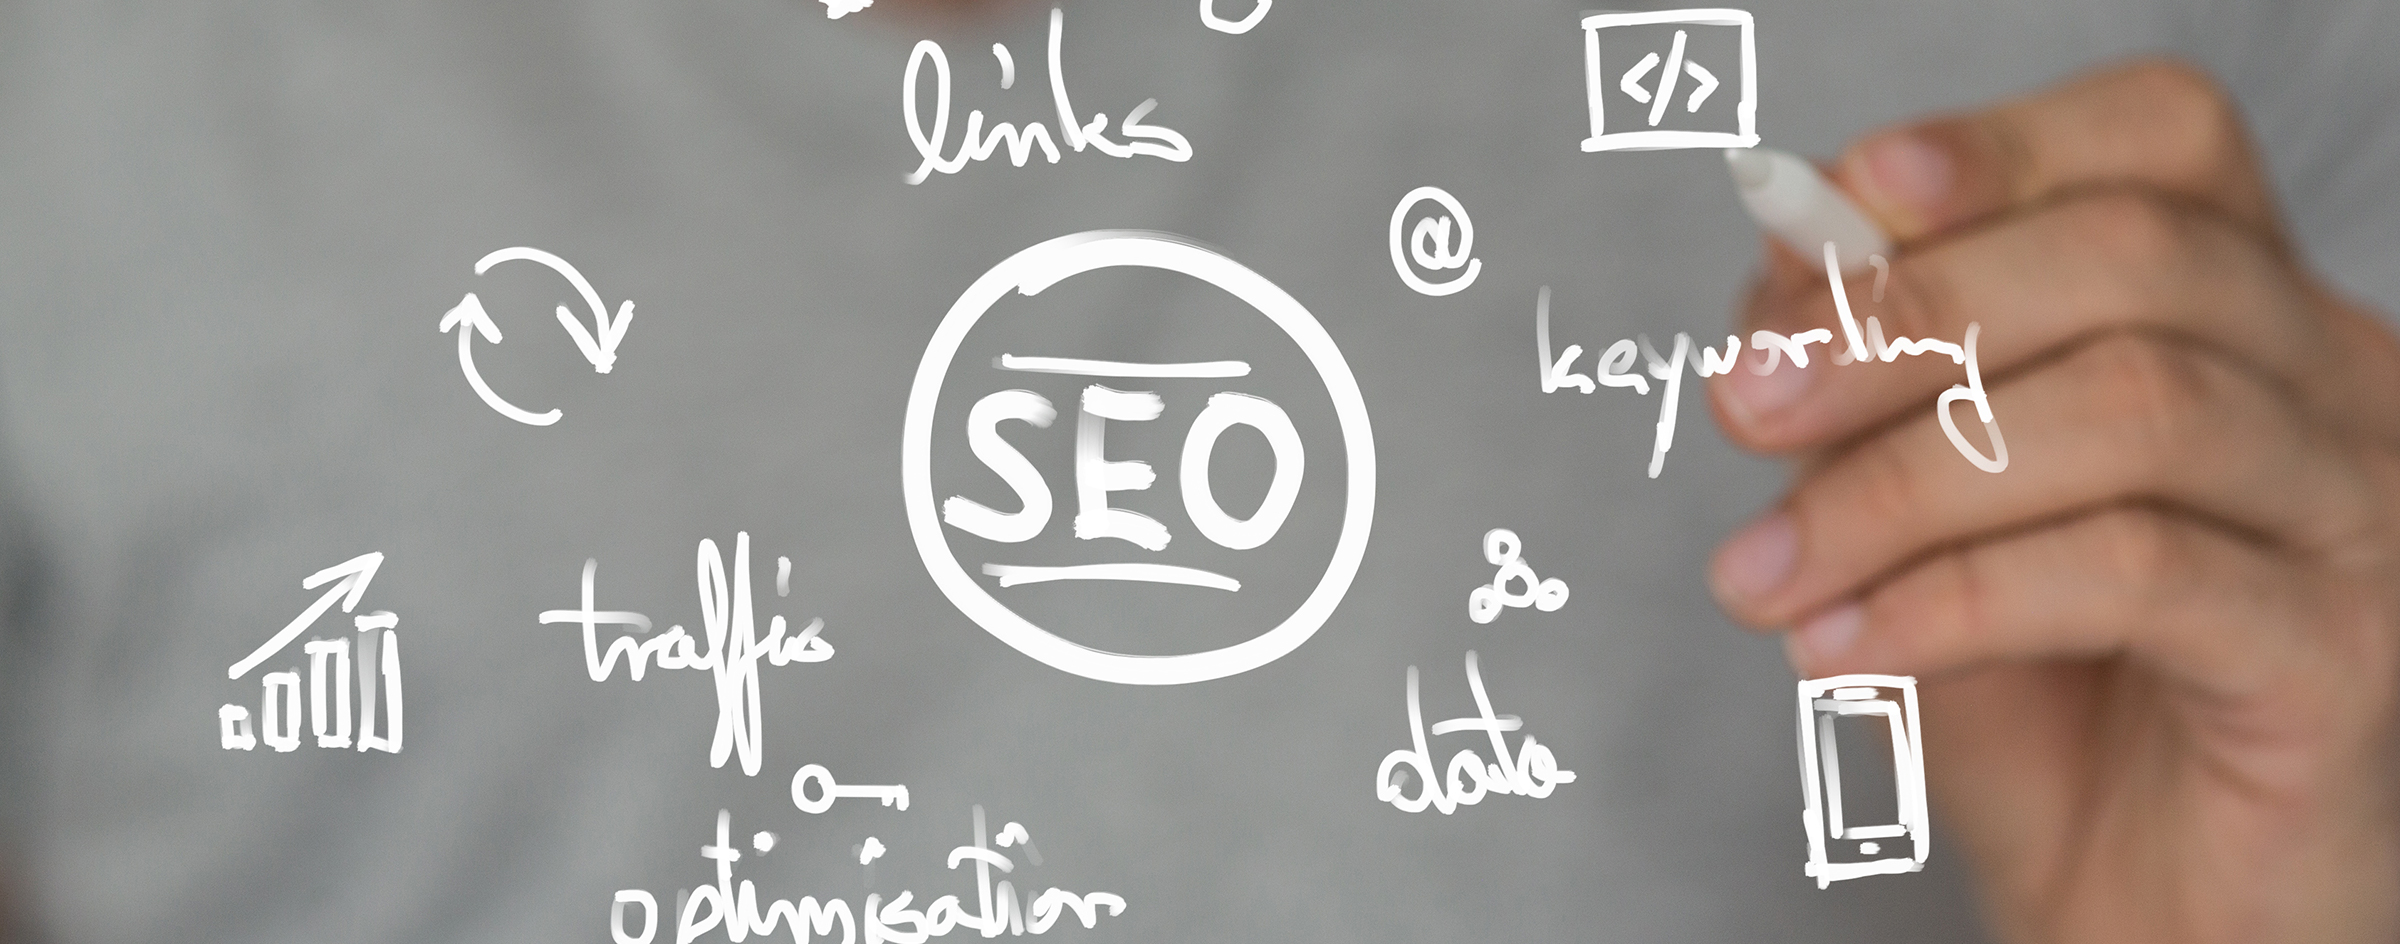 5 reasons why you should invest in SEO